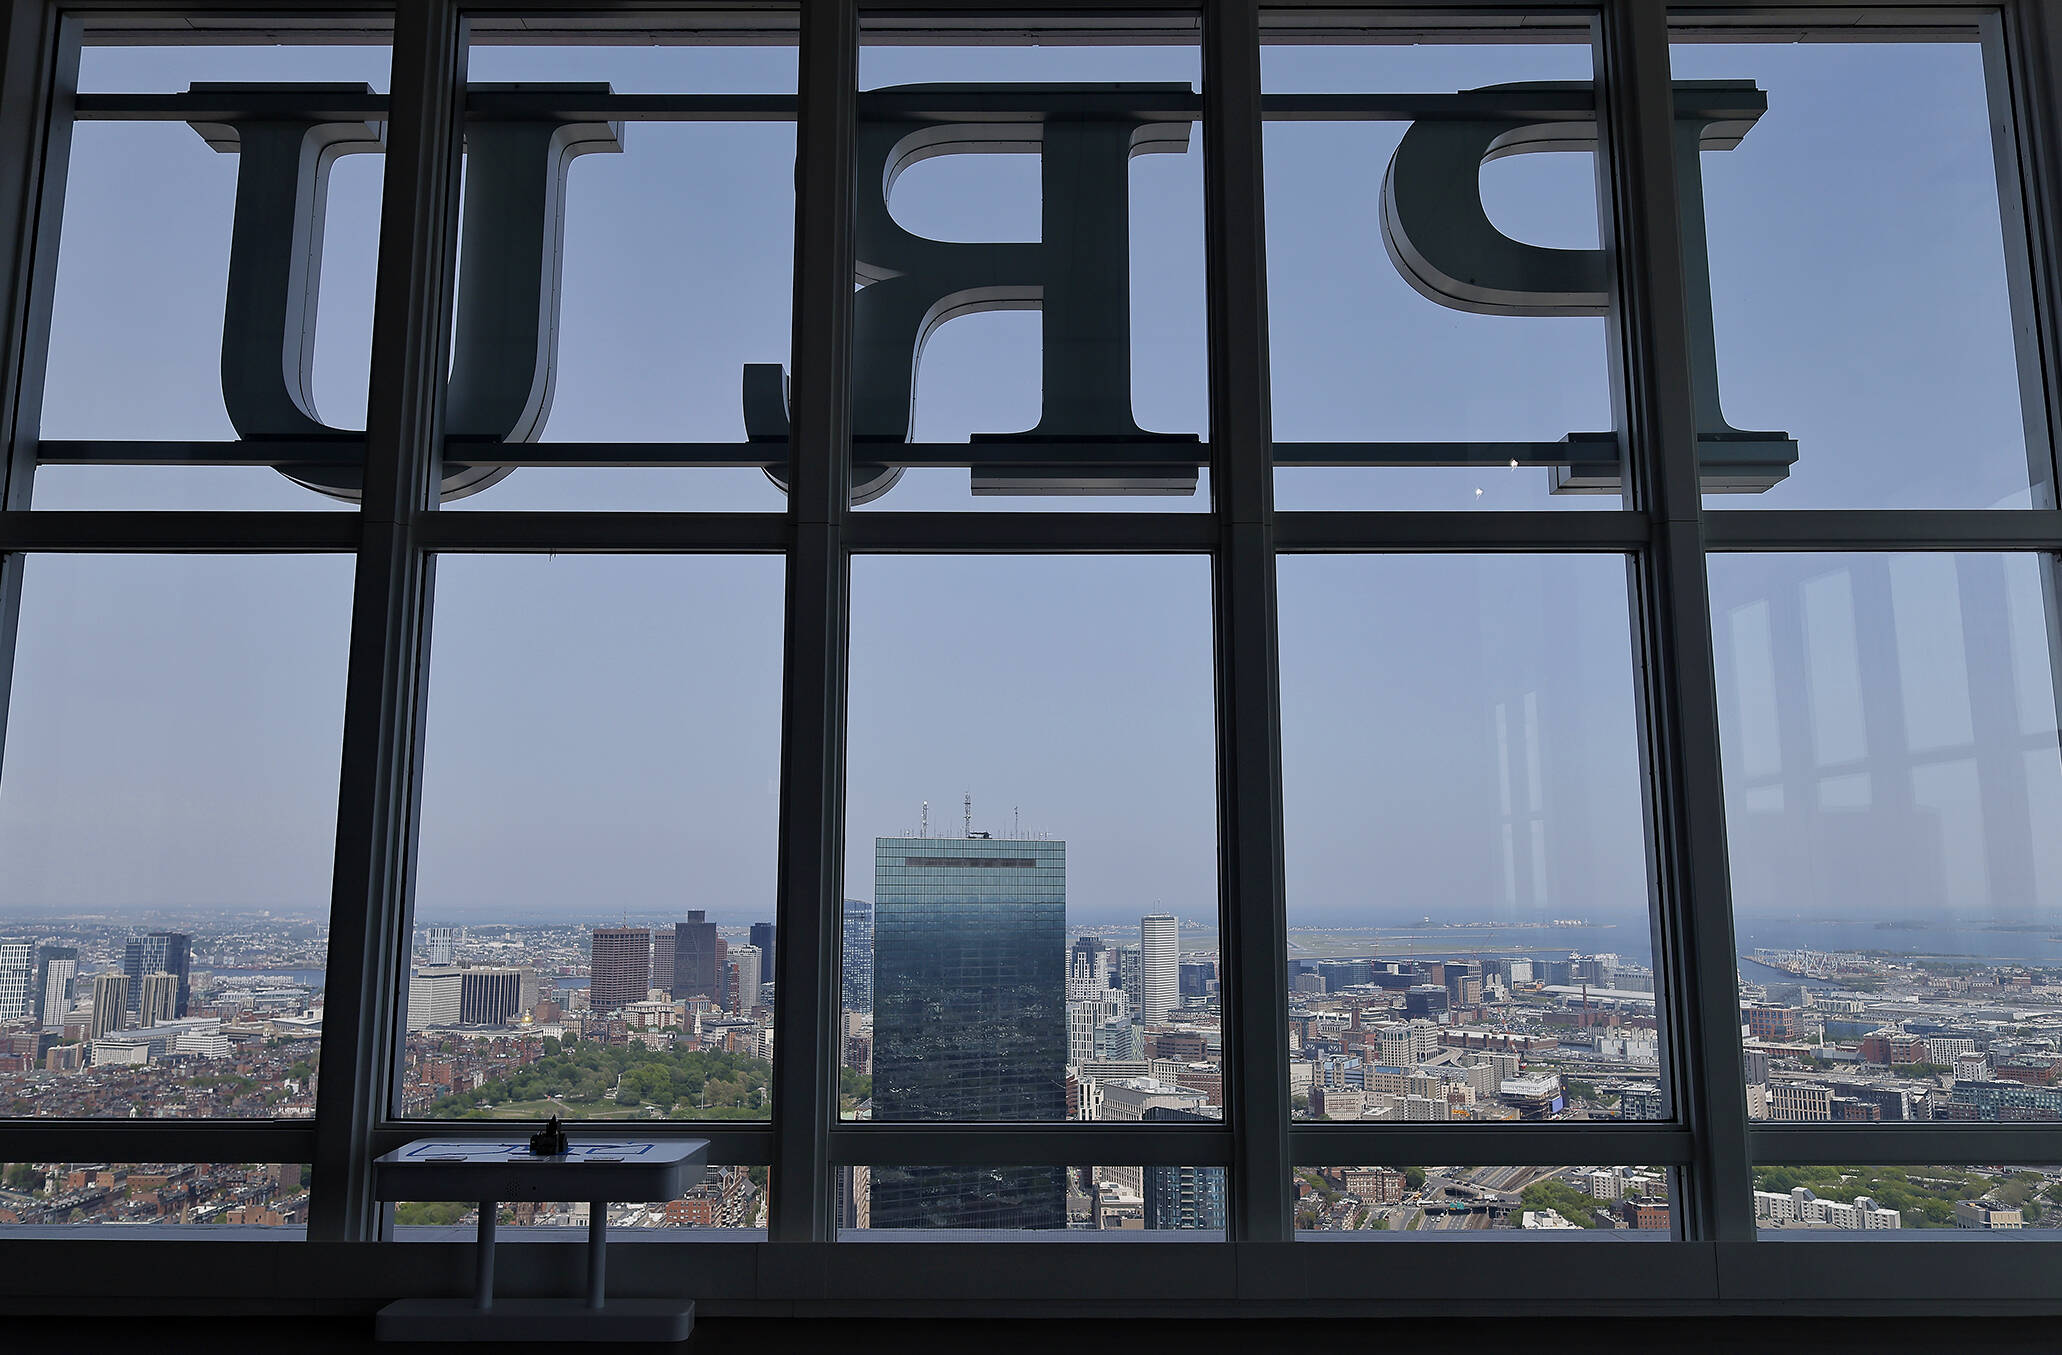 View Boston, the new observatory on top of the Prudential tower where Top of the Hub used to be, has three levels. (Photo by Lane Turner/The Boston Globe via Getty Images)